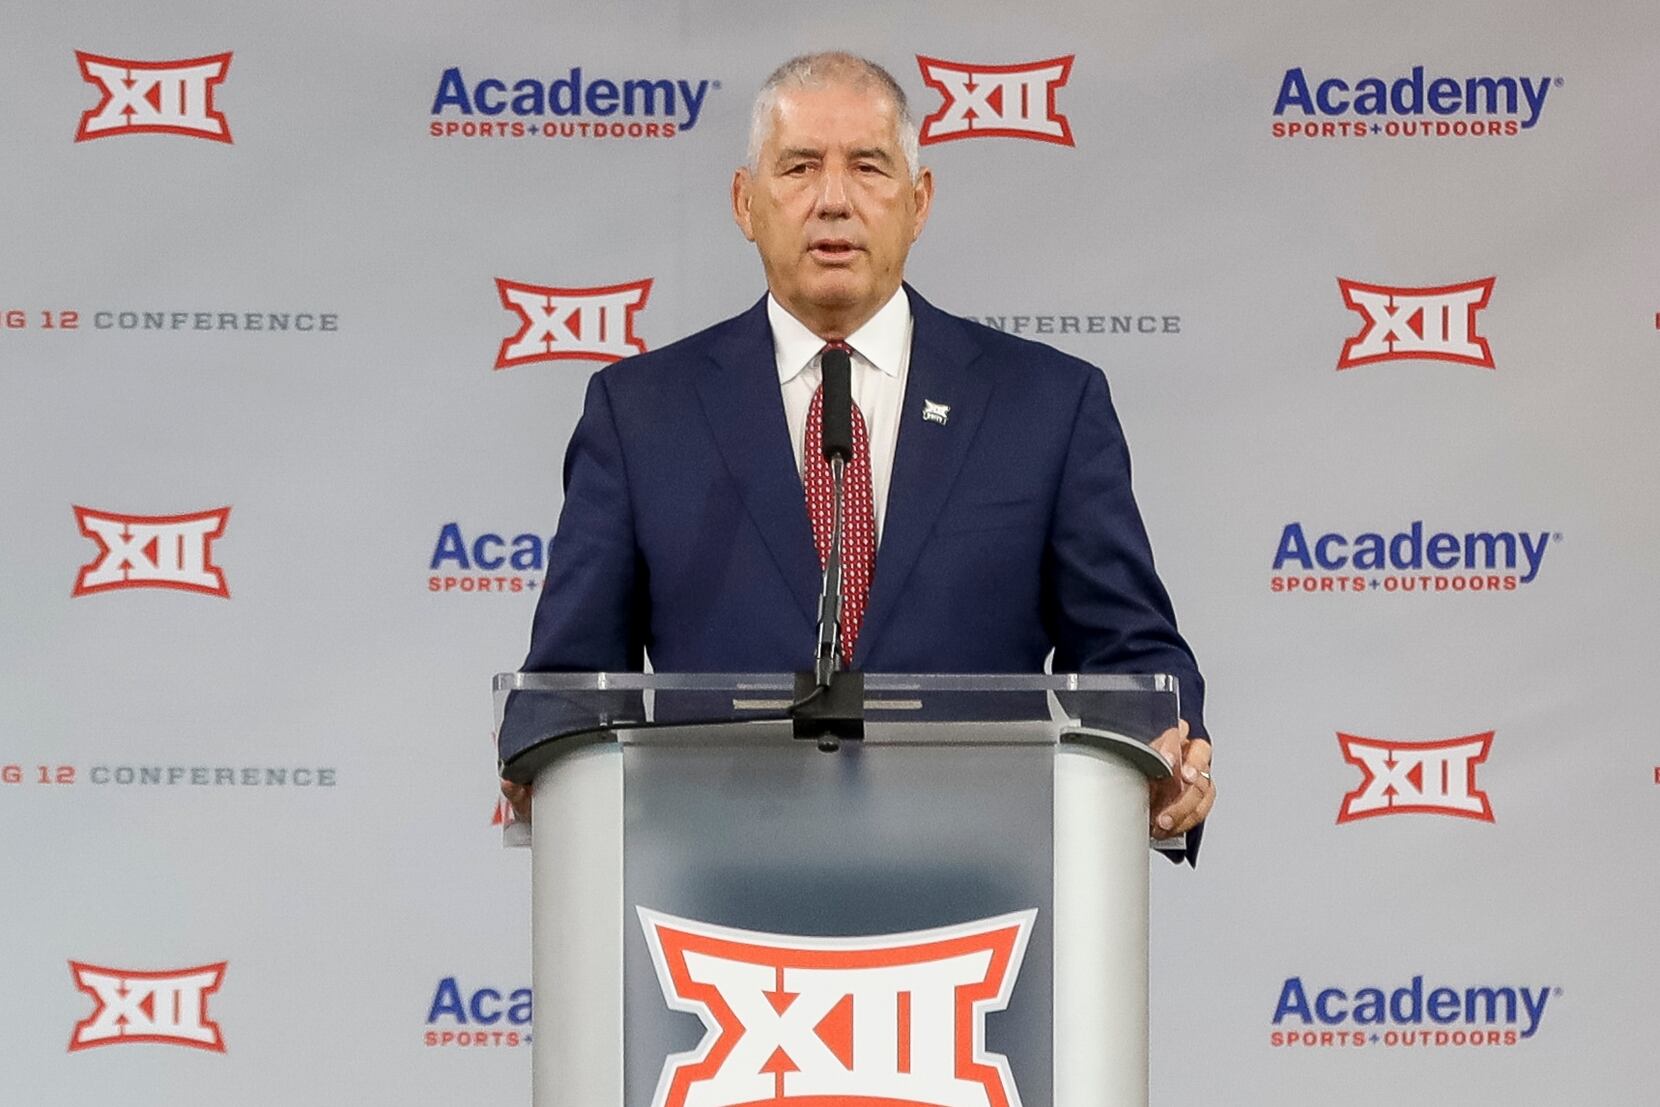 Bigger, deeper and stronger: Big 12 welcomes 4 new schools to